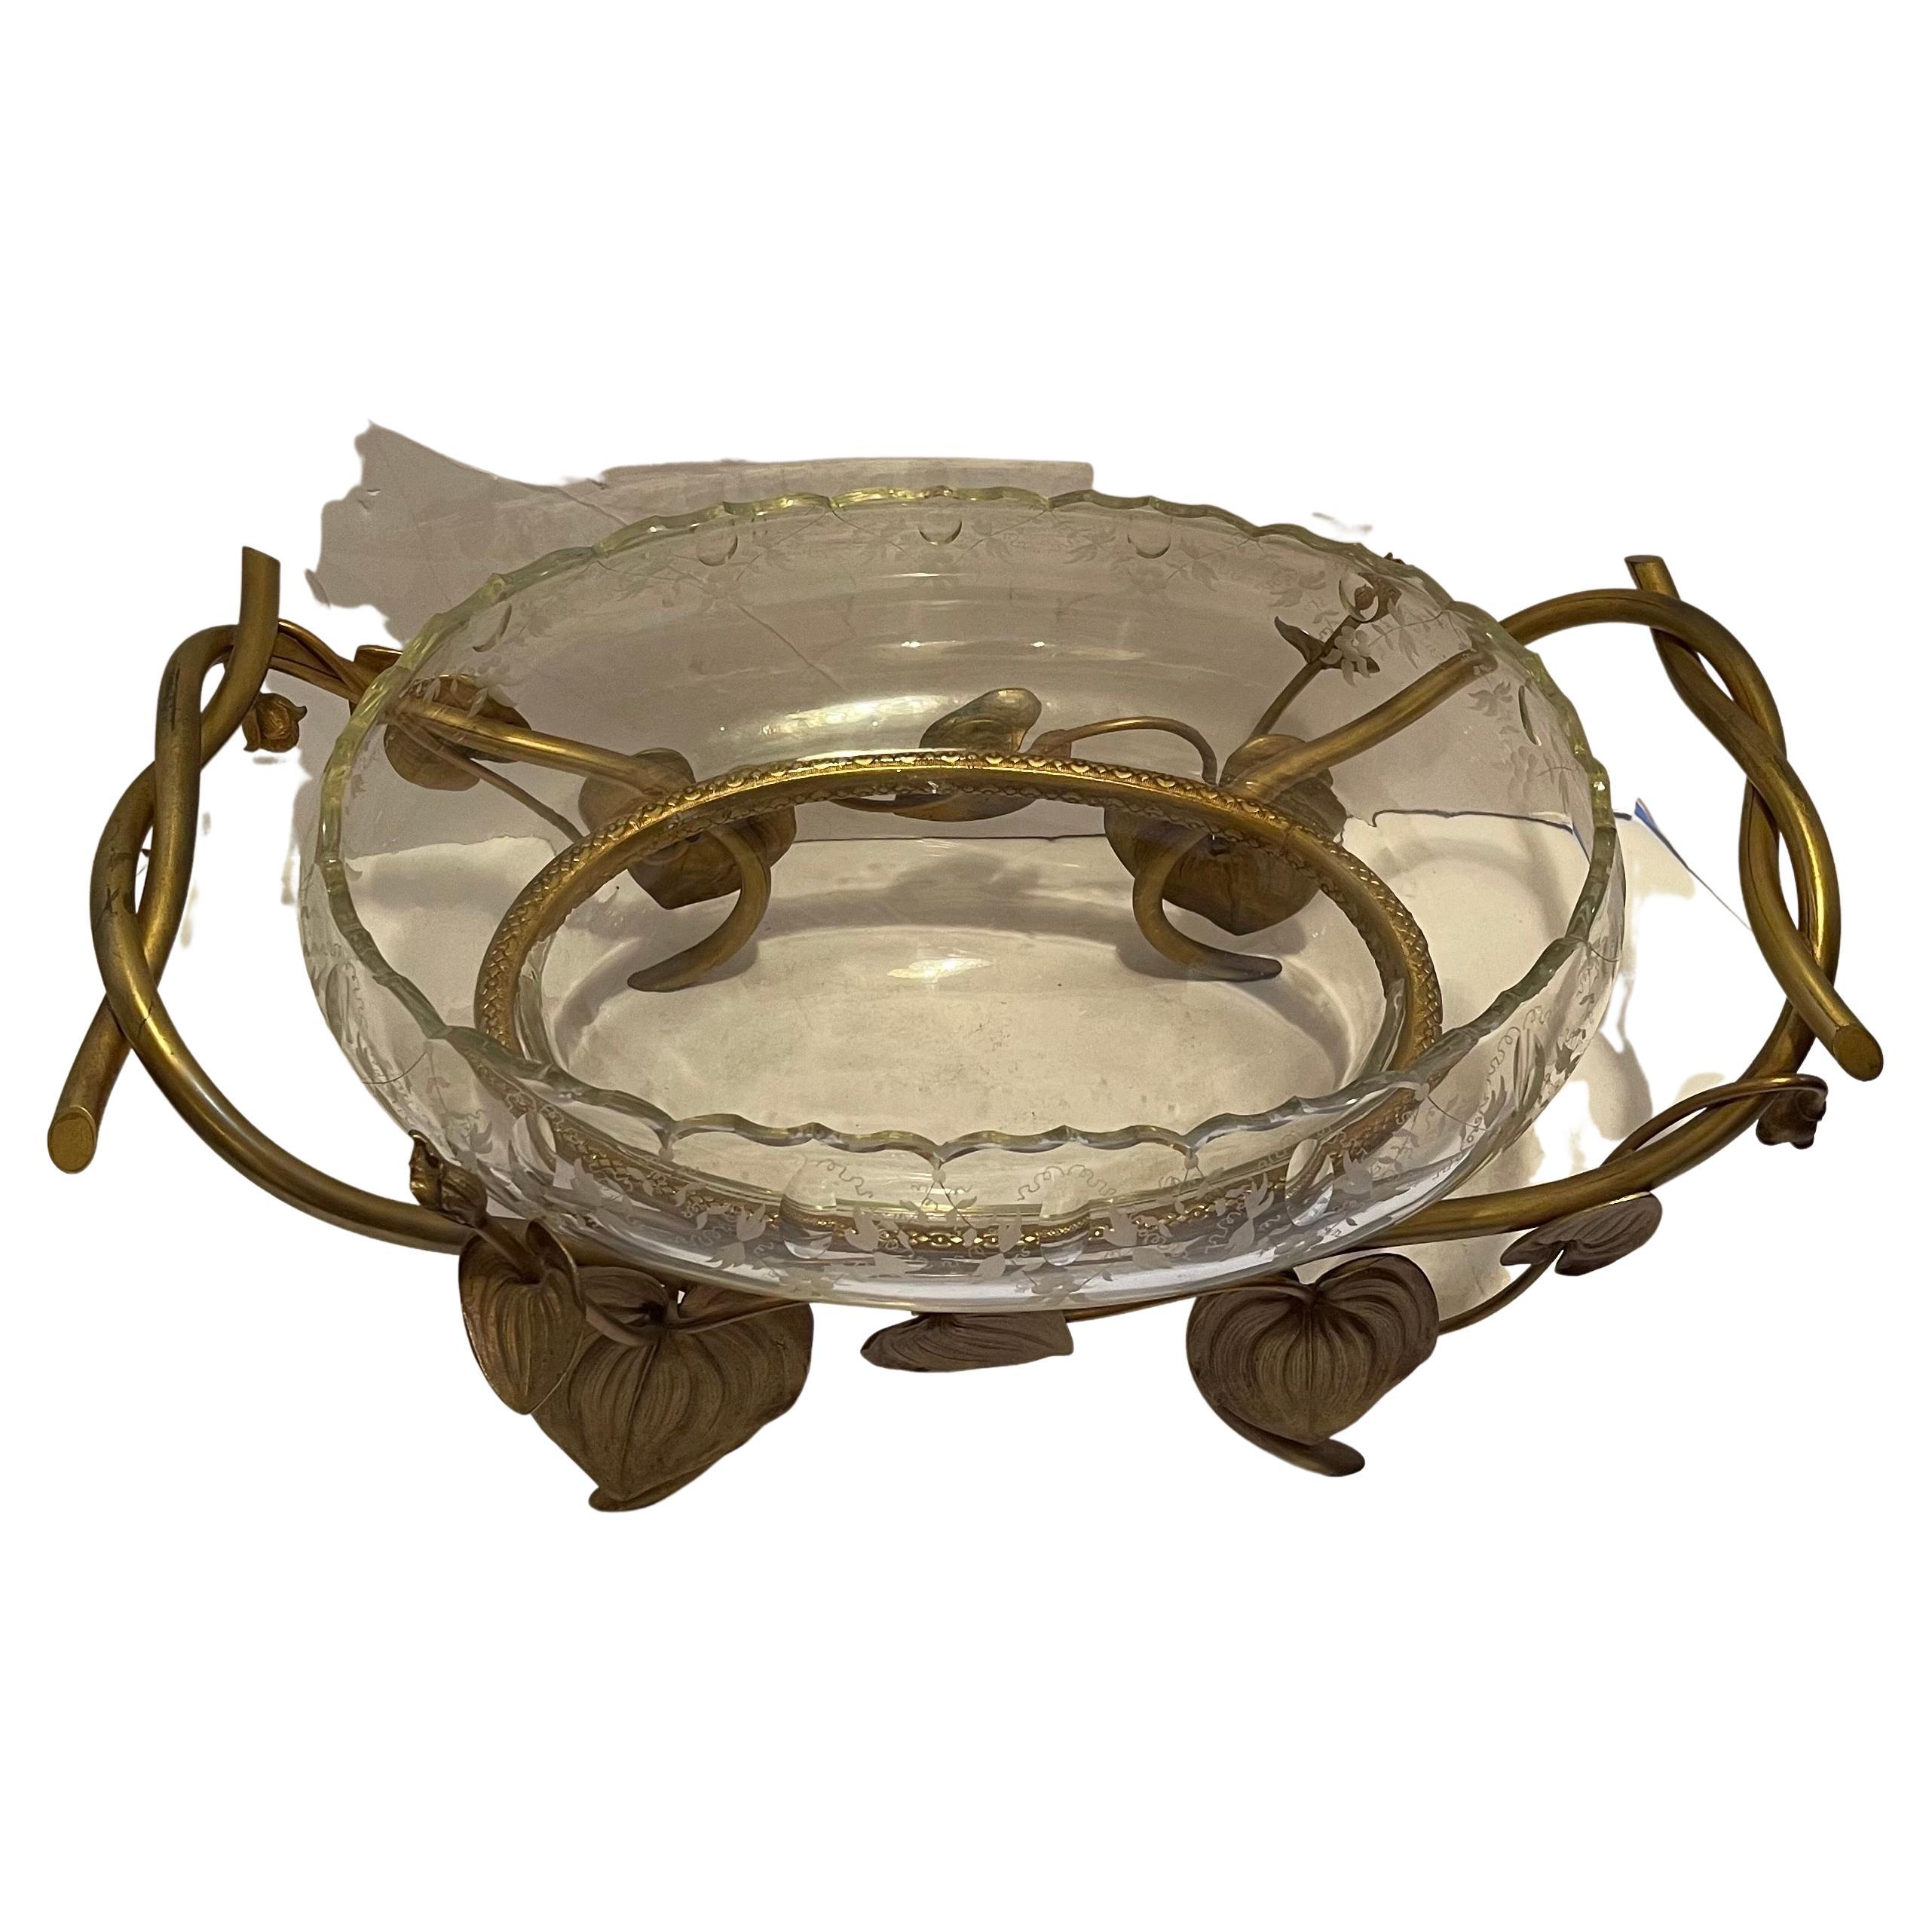 A wonderful large French Art Nouveau Ormolu bronze oval centerpiece with etched and scalloped cut crystal insert.